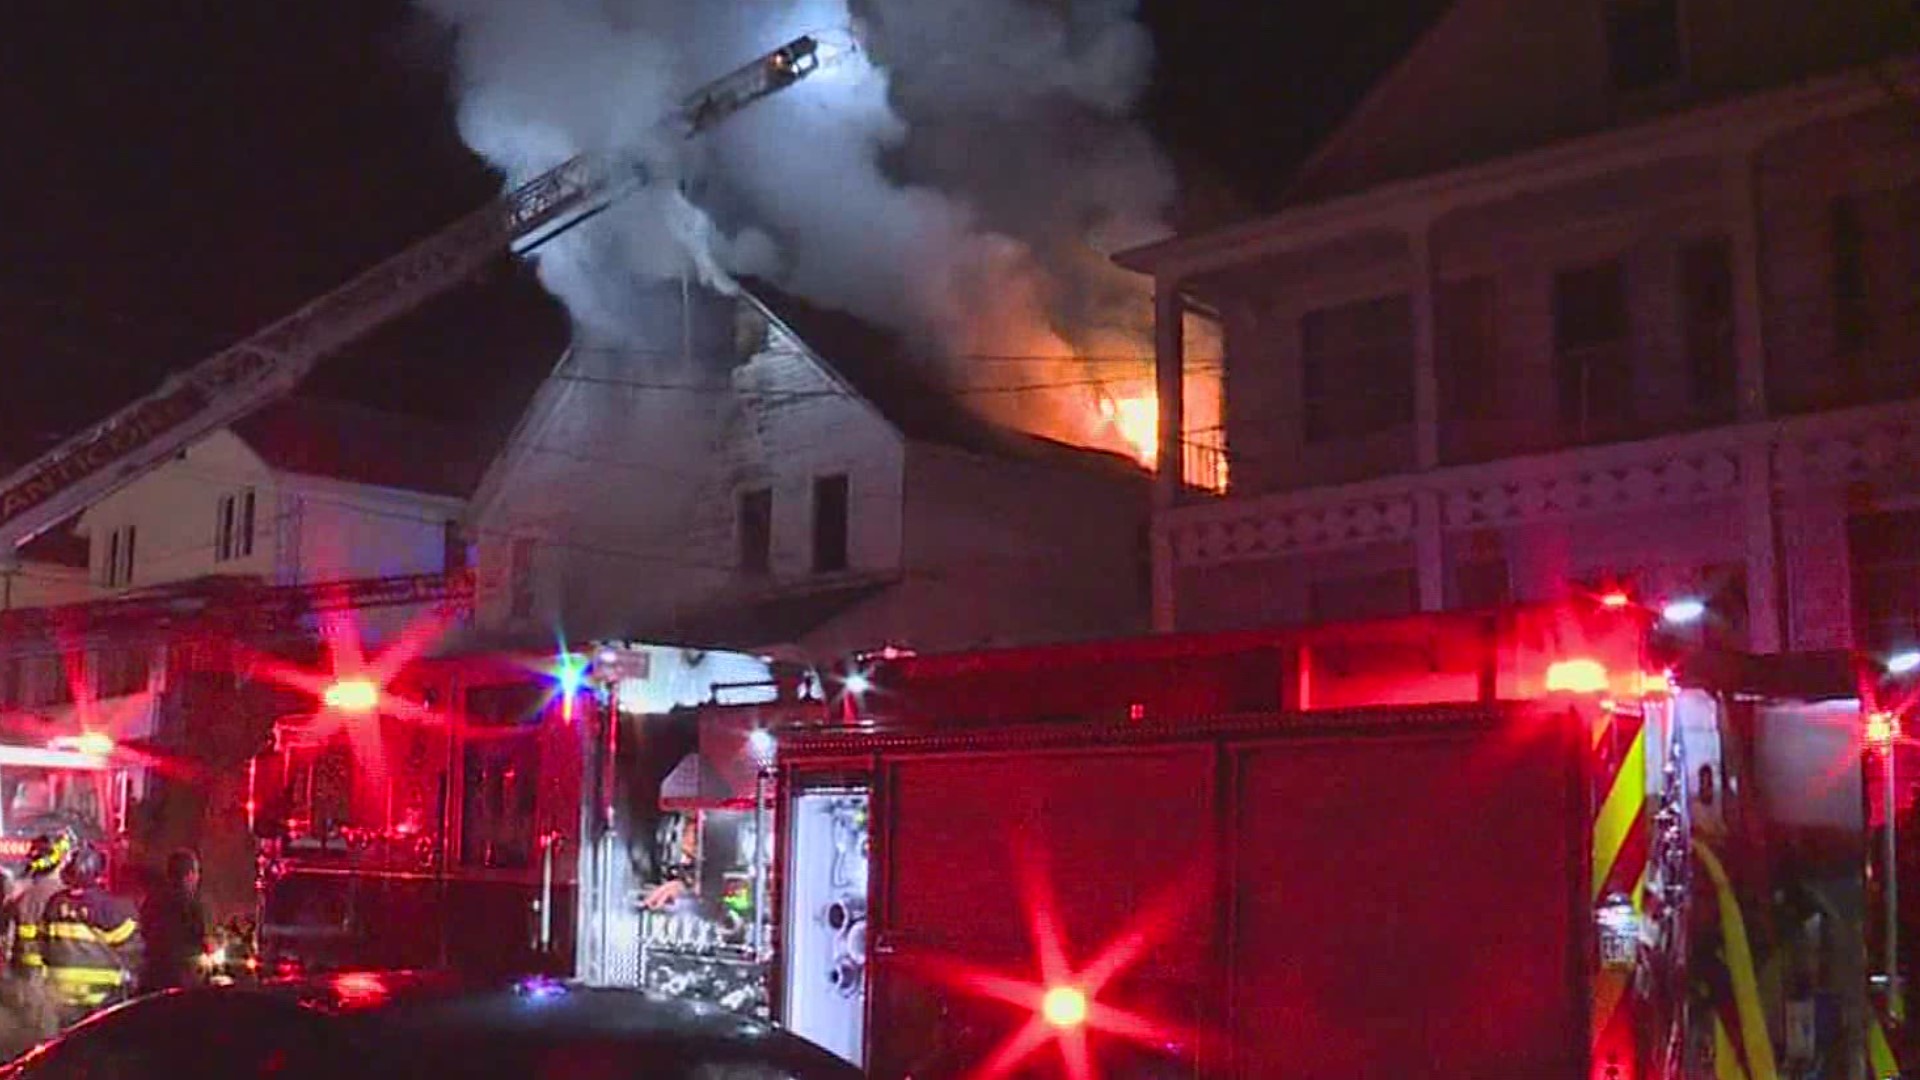 Fire crews in Luzerne County battled flames at a home early Friday morning.